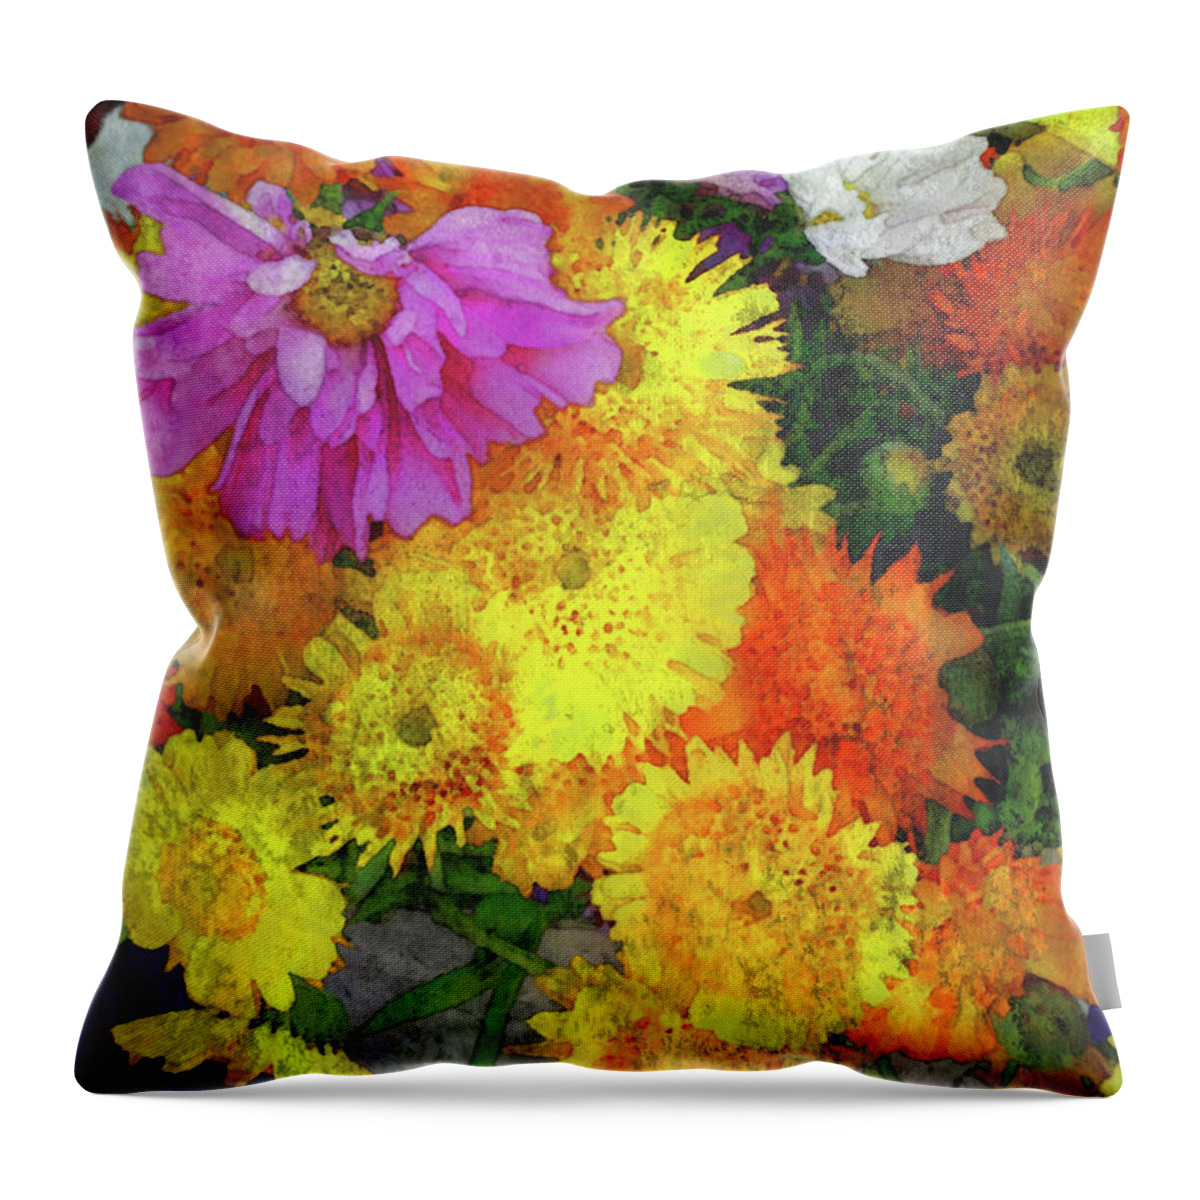 Flowers That Smile Throw Pillow featuring the digital art Flowers That Smile Digital Watercolor by James Temple